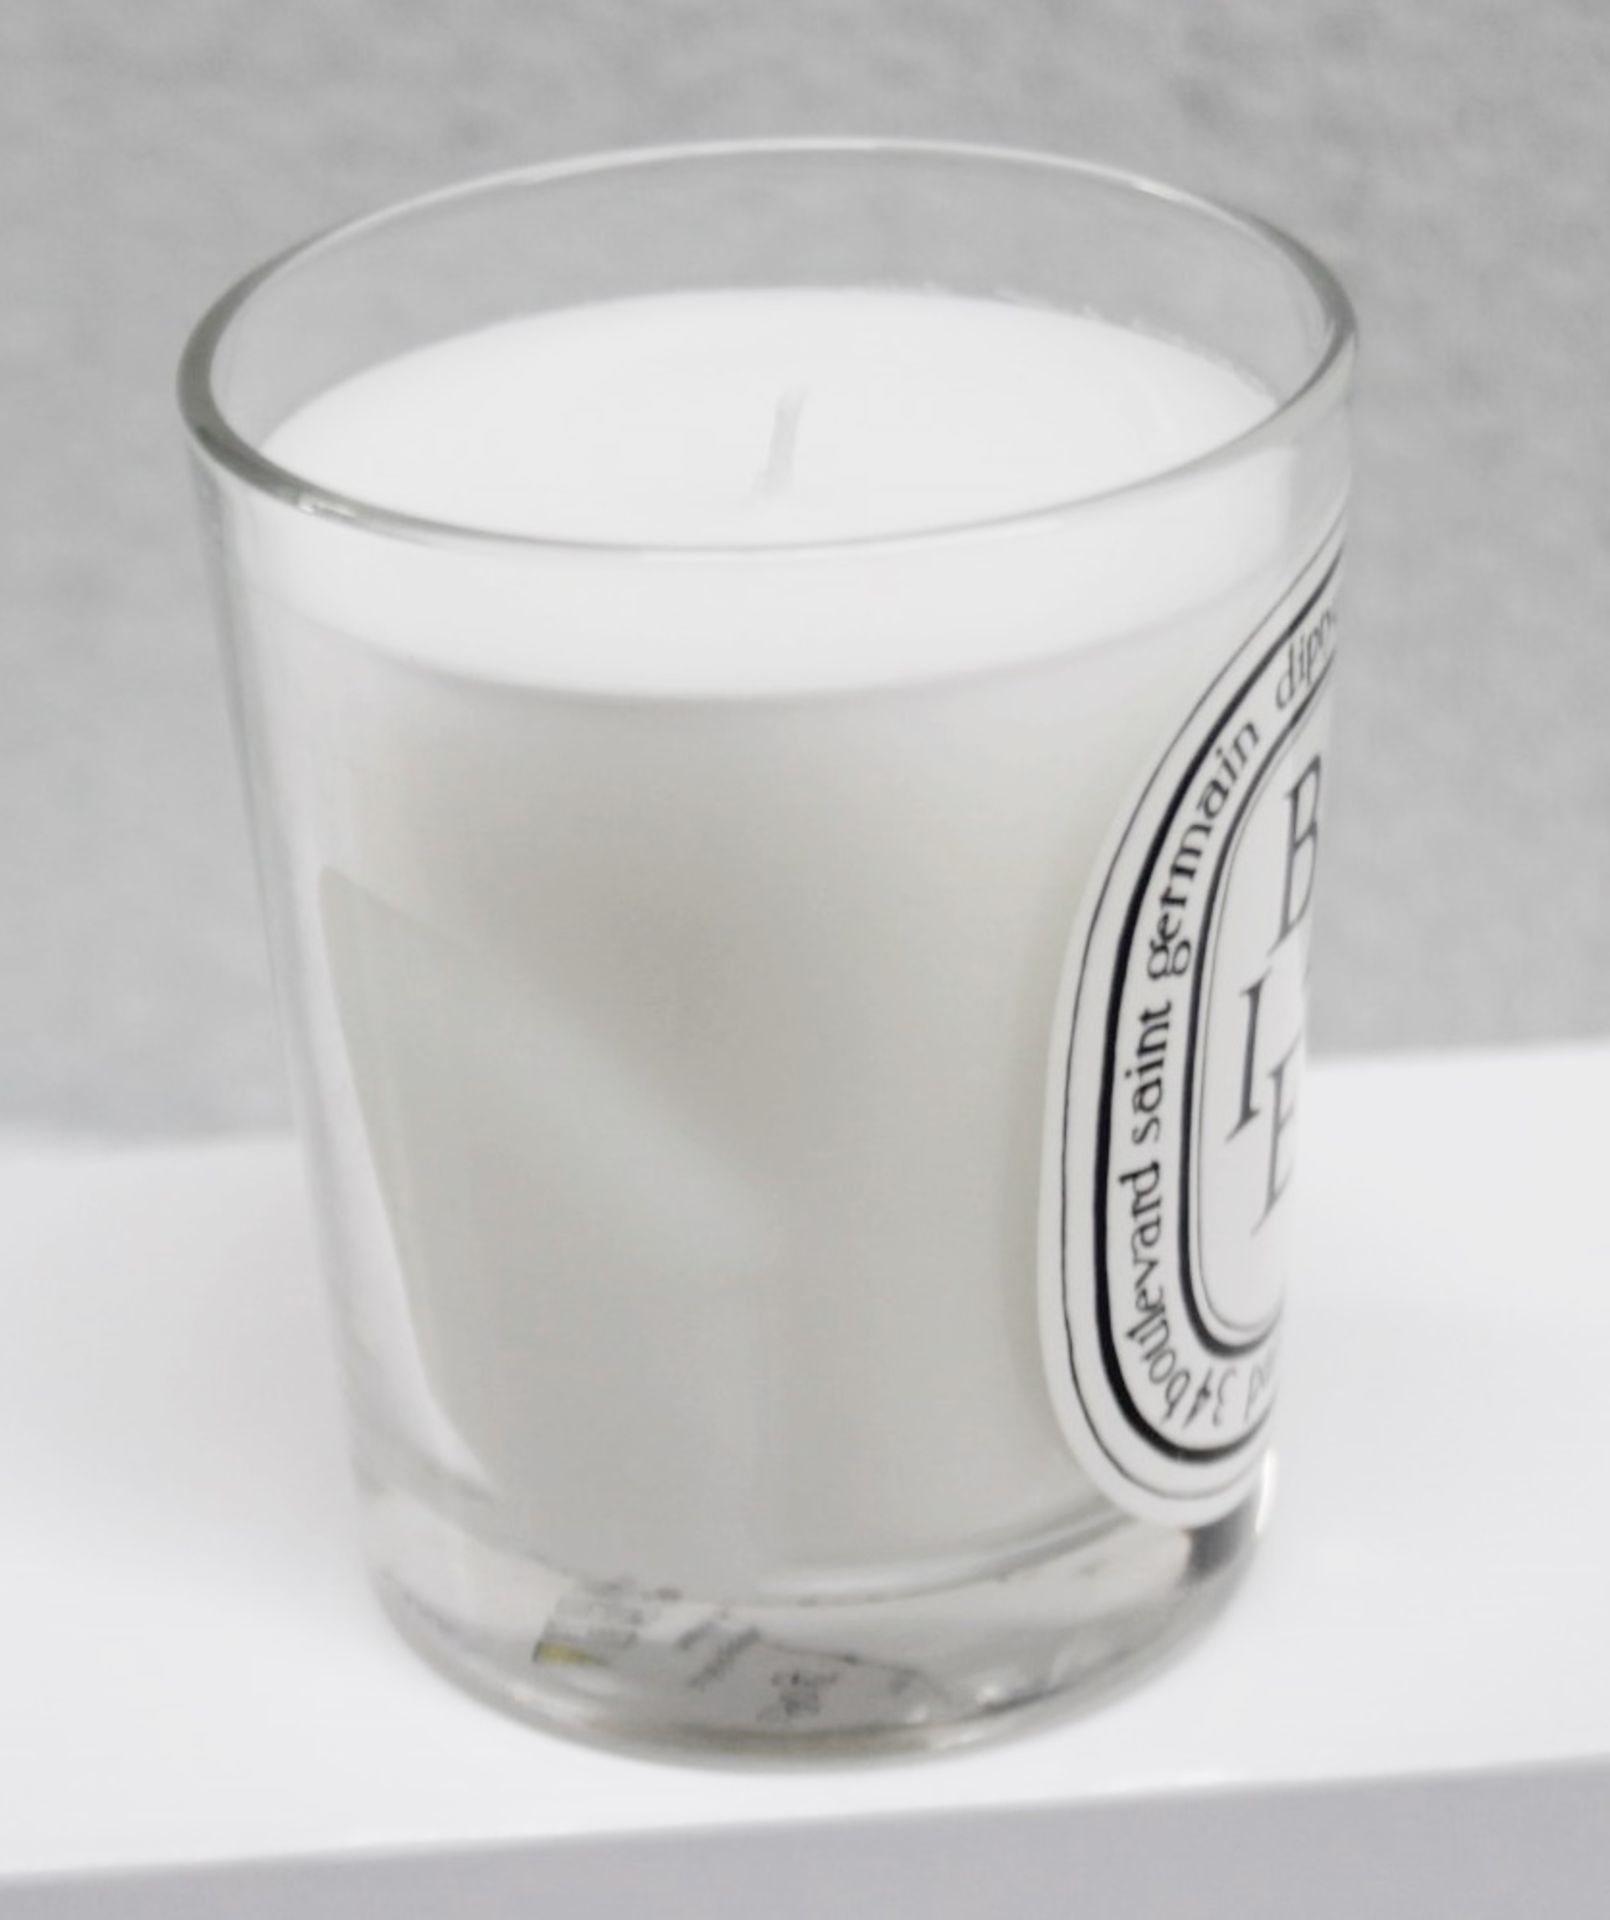 1 x DIPTYQUE Luxury Scented Candle - Baies (Berries) 190G / 6.5Oz - Original Price £54.00 - Image 4 of 5